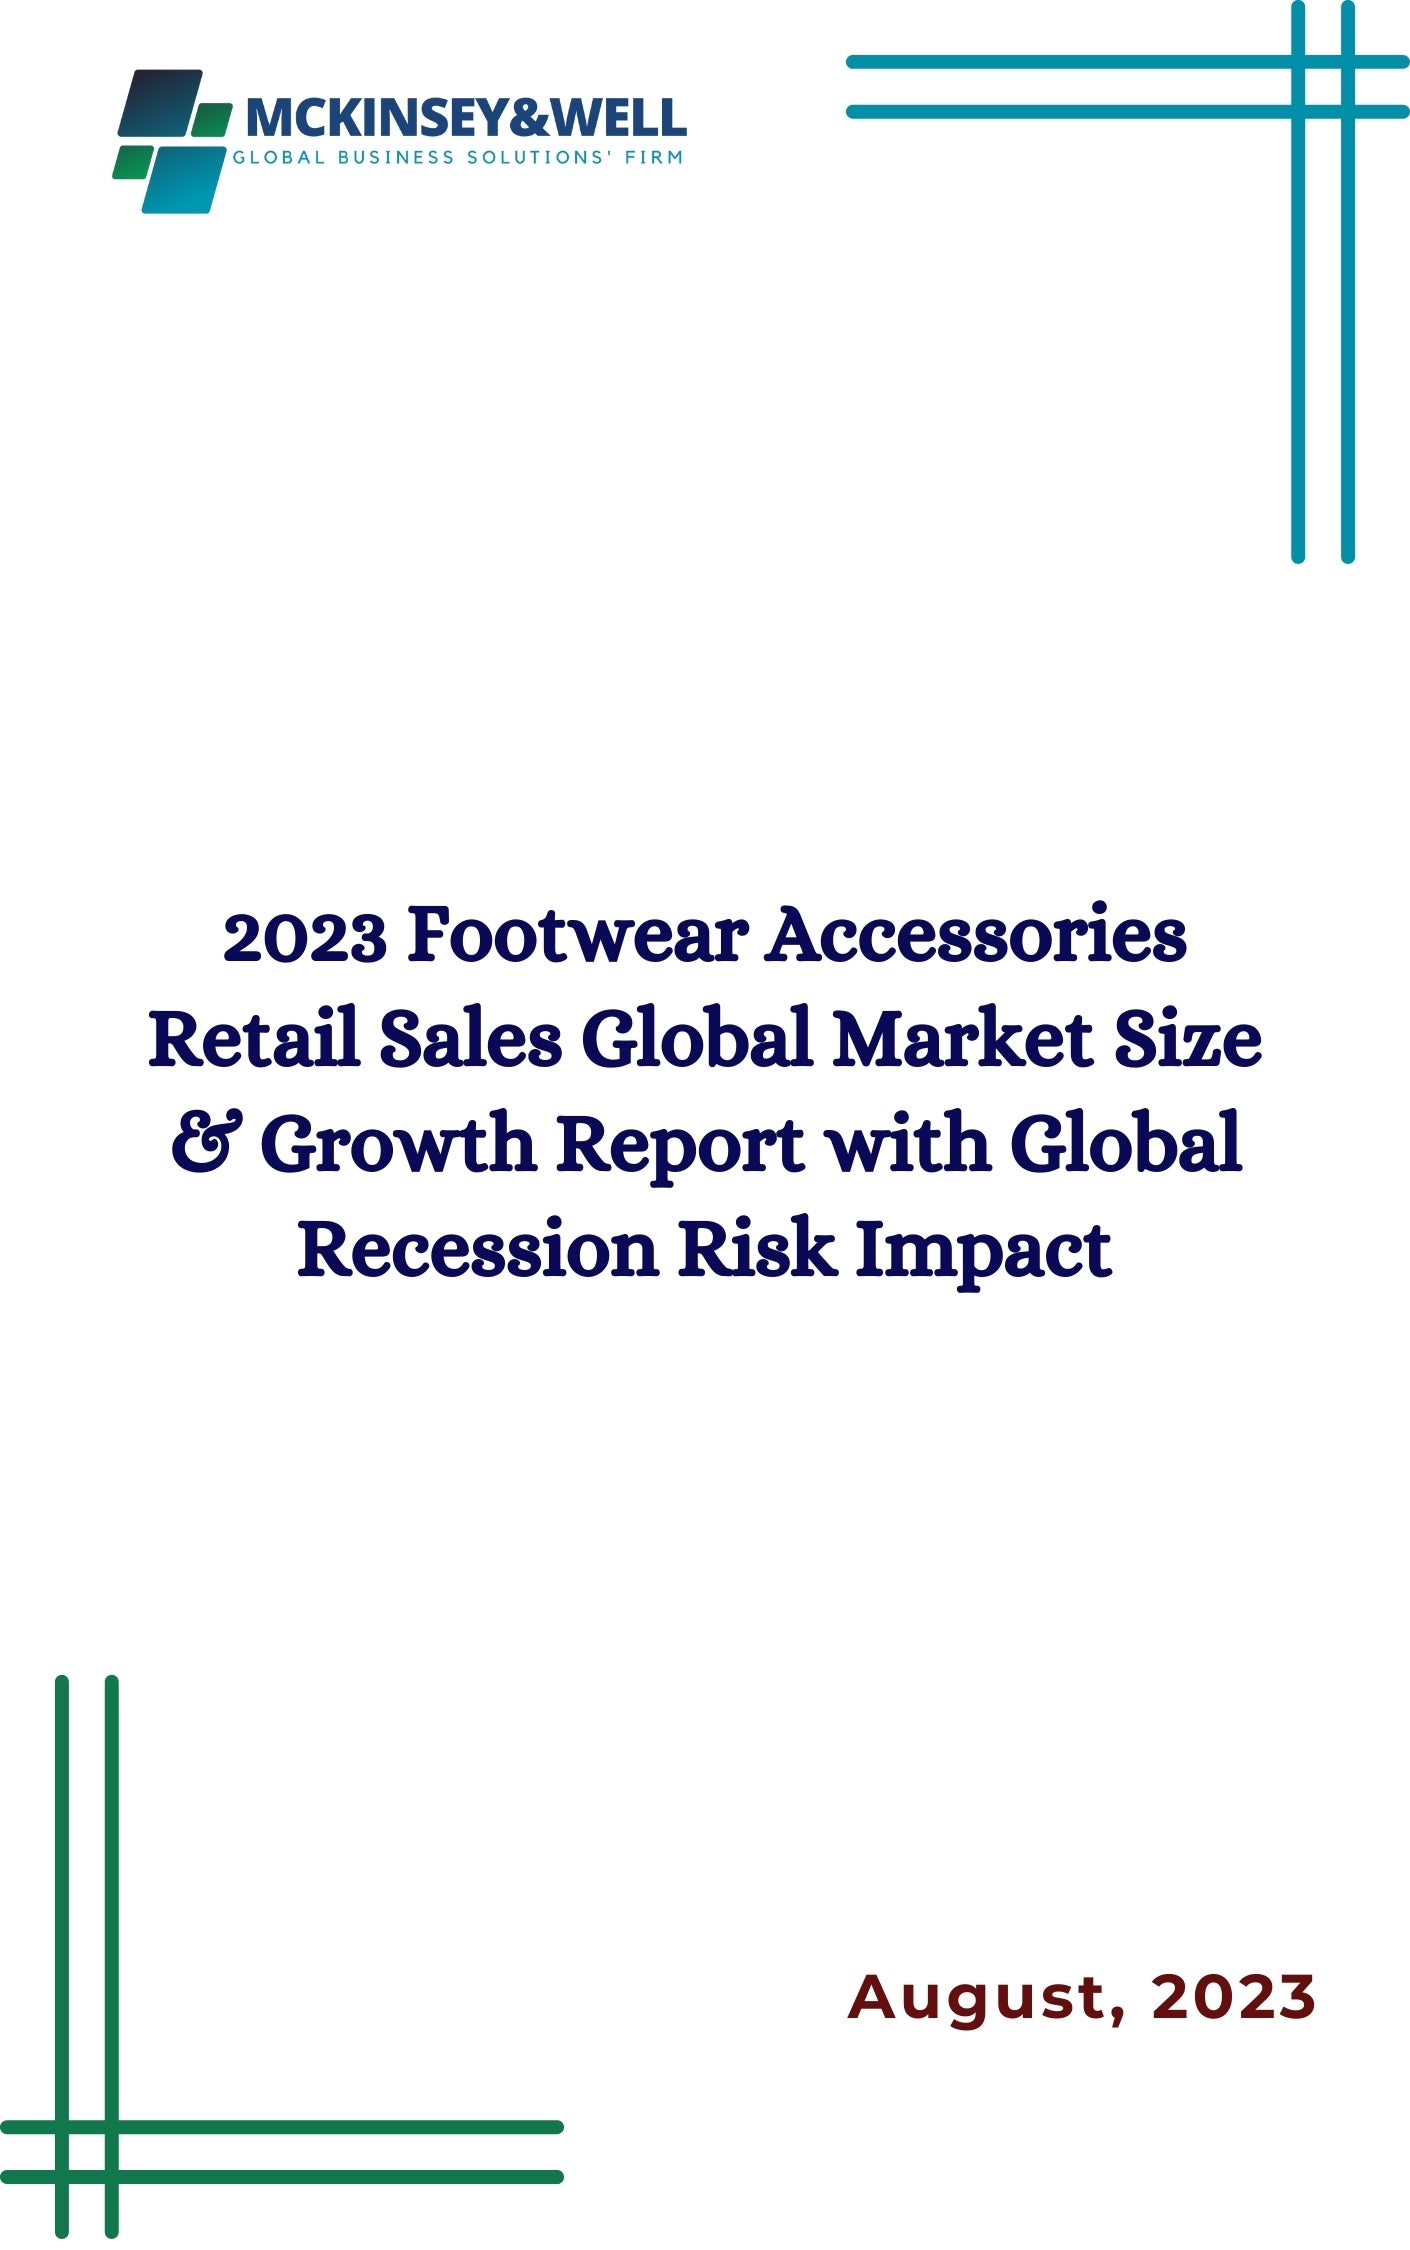 2023 Footwear Accessories Retail Sales Global Market Size & Growth Report with Global Recession Risk Impact